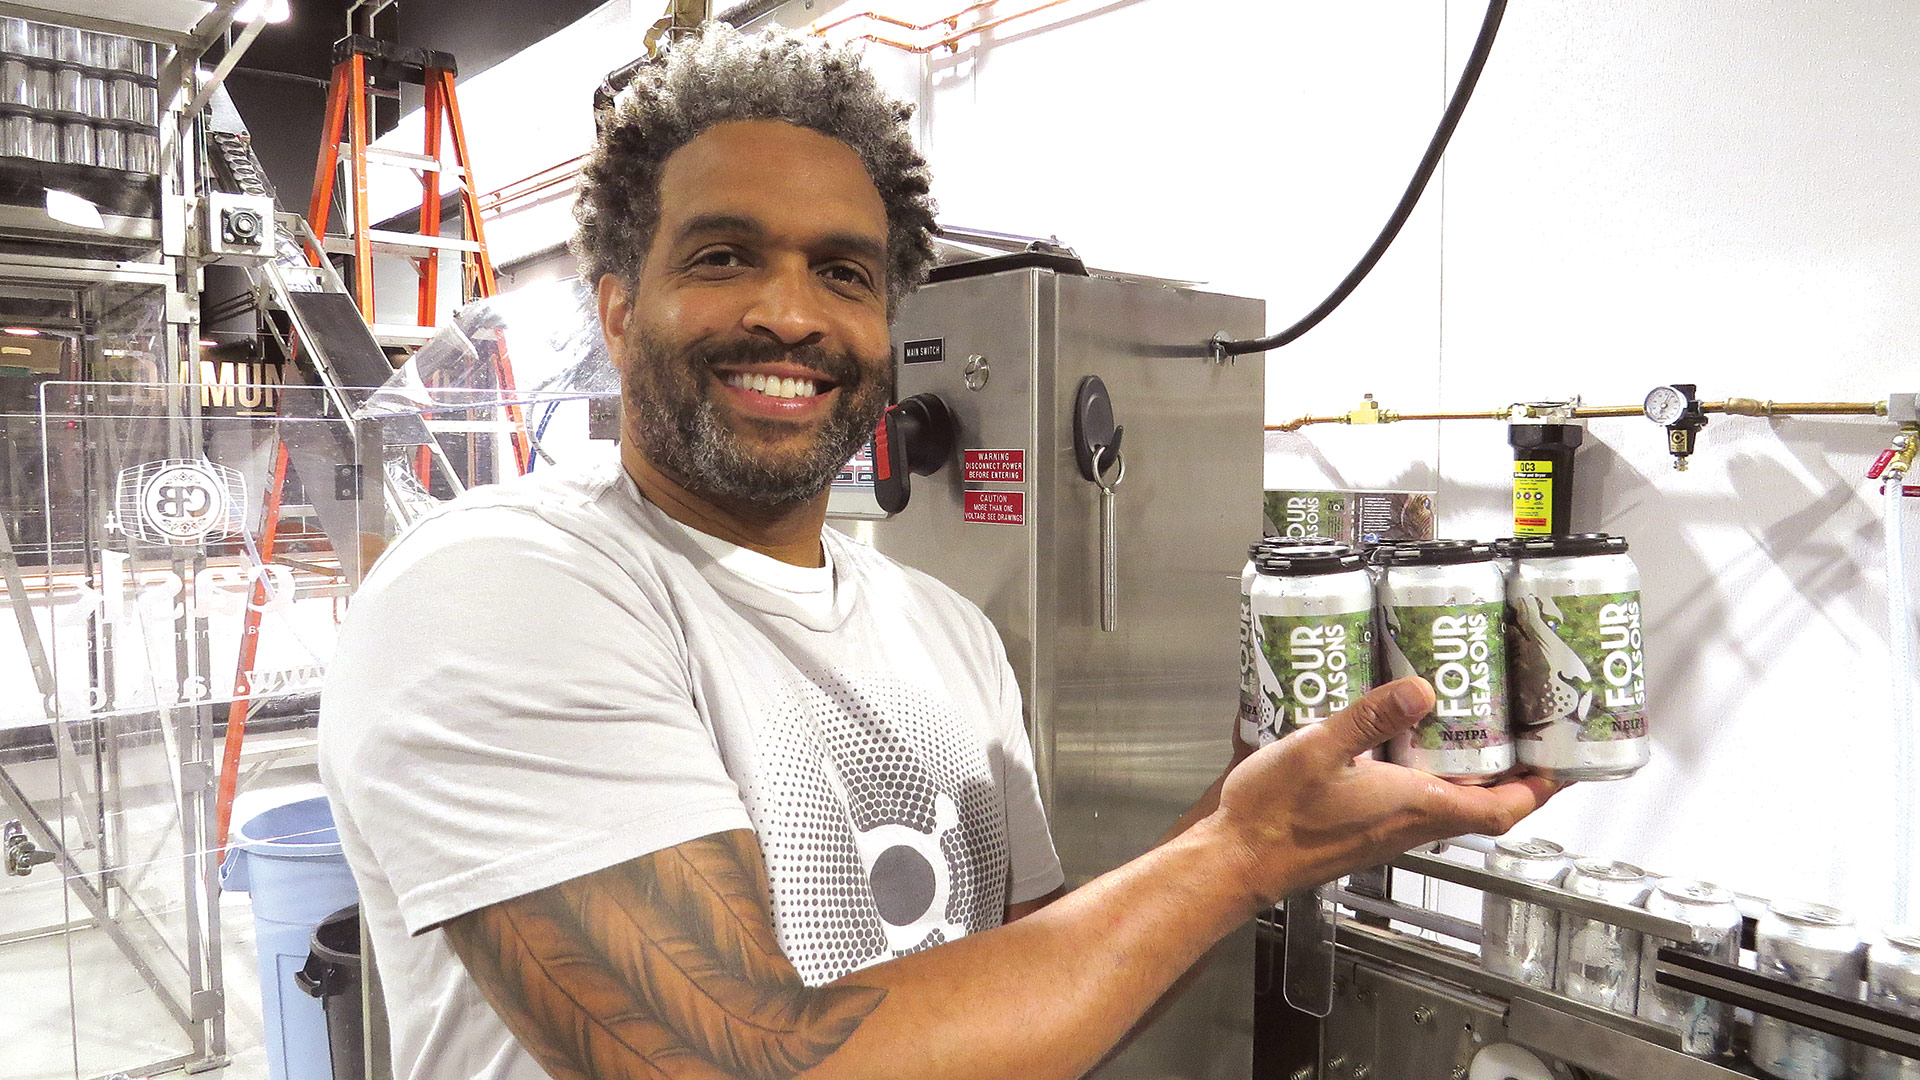 Ray Berry, seen here at the canning line at White Lion’s downtown Springfield brewery